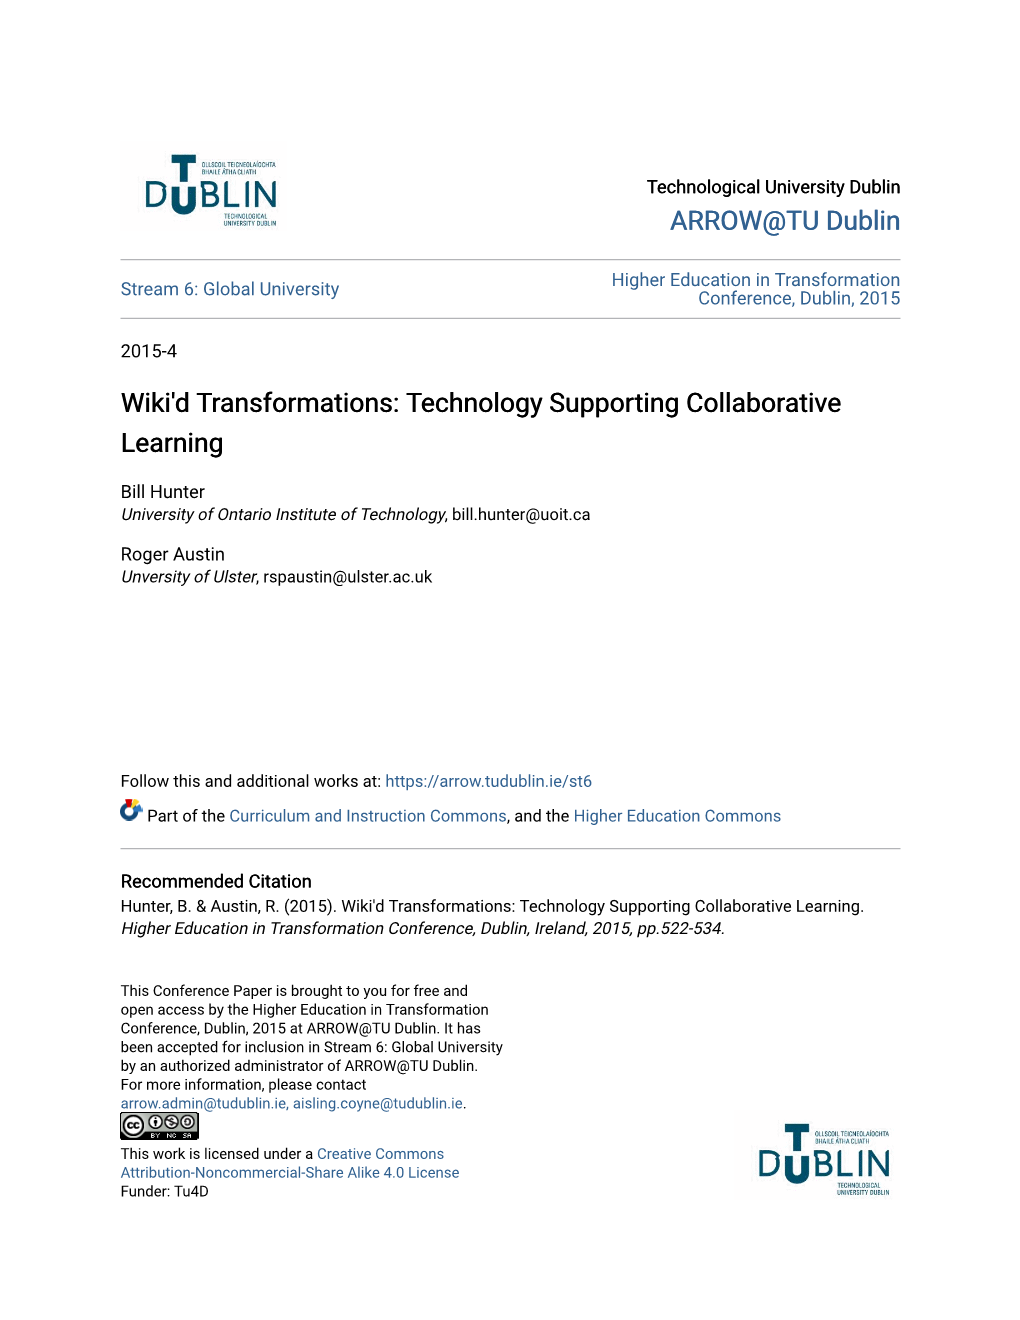 Wiki'd Transformations: Technology Supporting Collaborative Learning